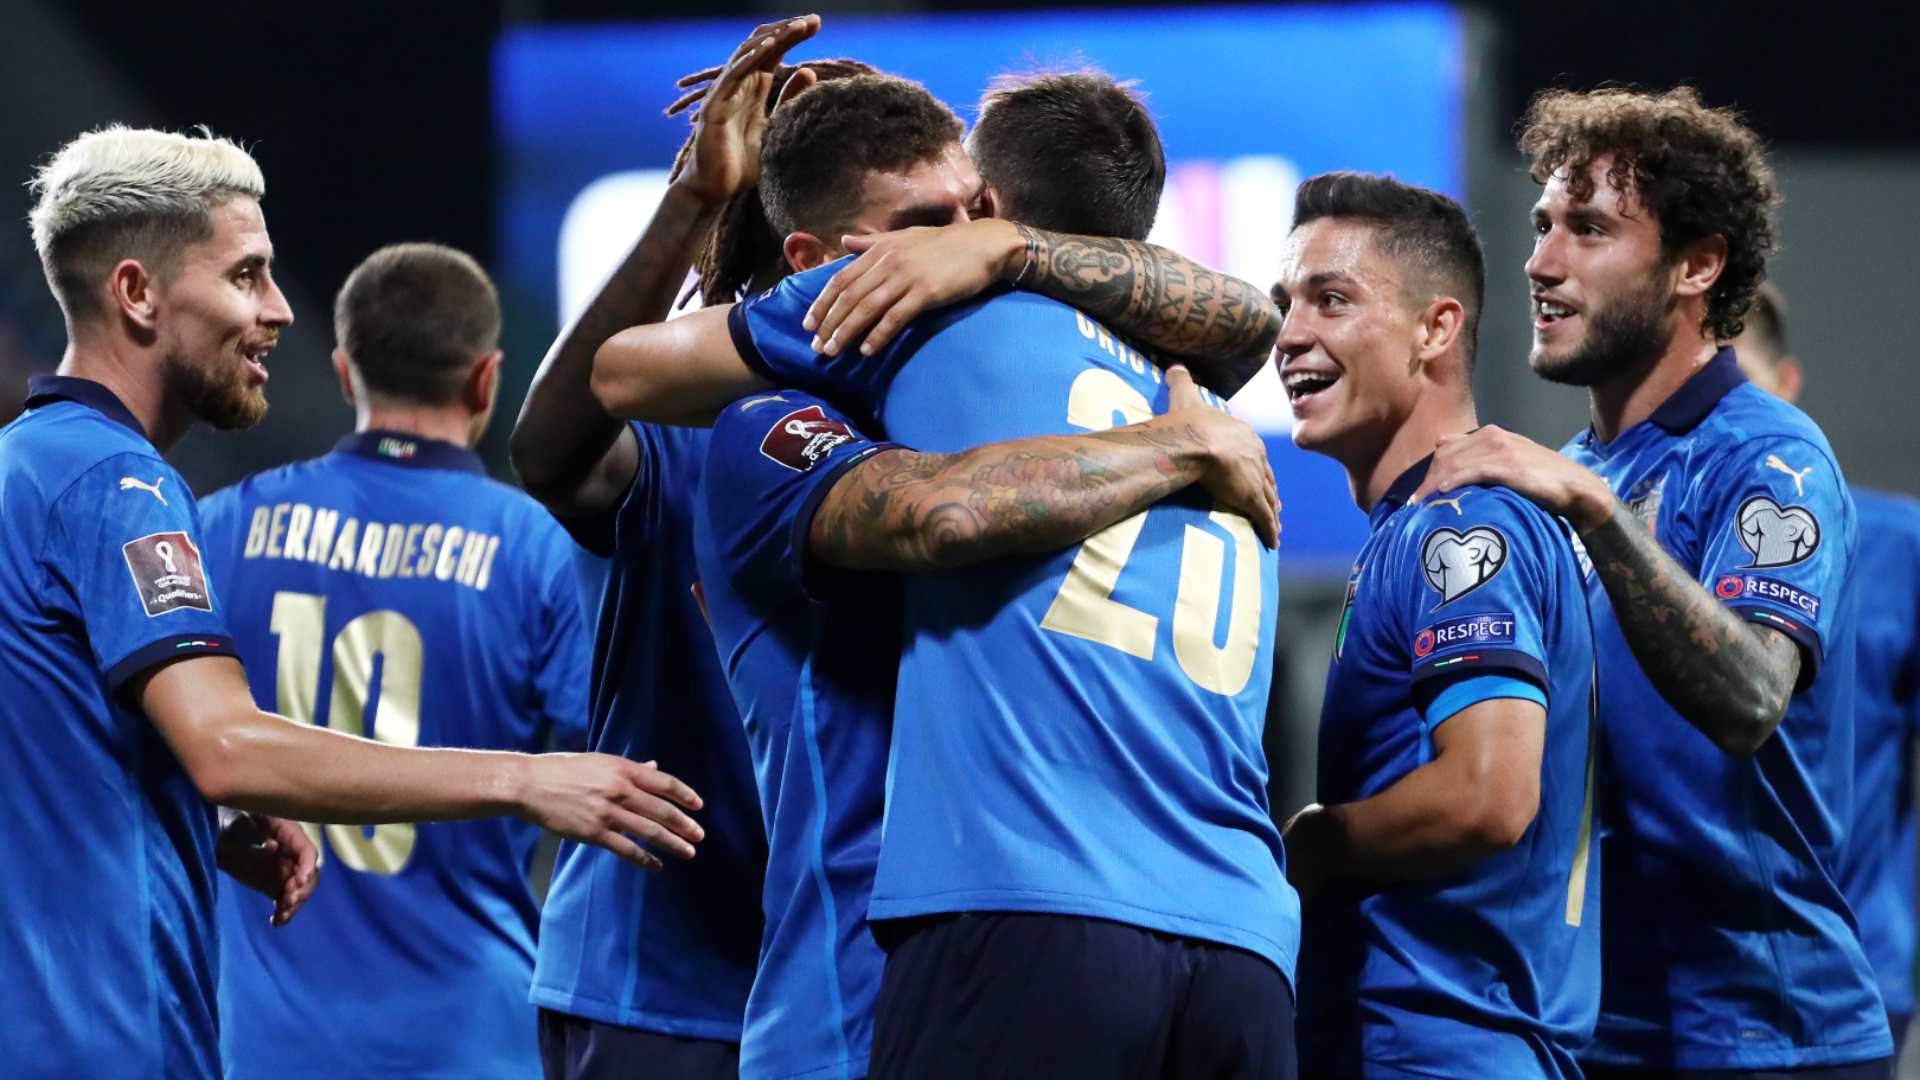 World Cup Qualifiers: Italy Break a World Record in a 5-0 Humbling of Lithuania!